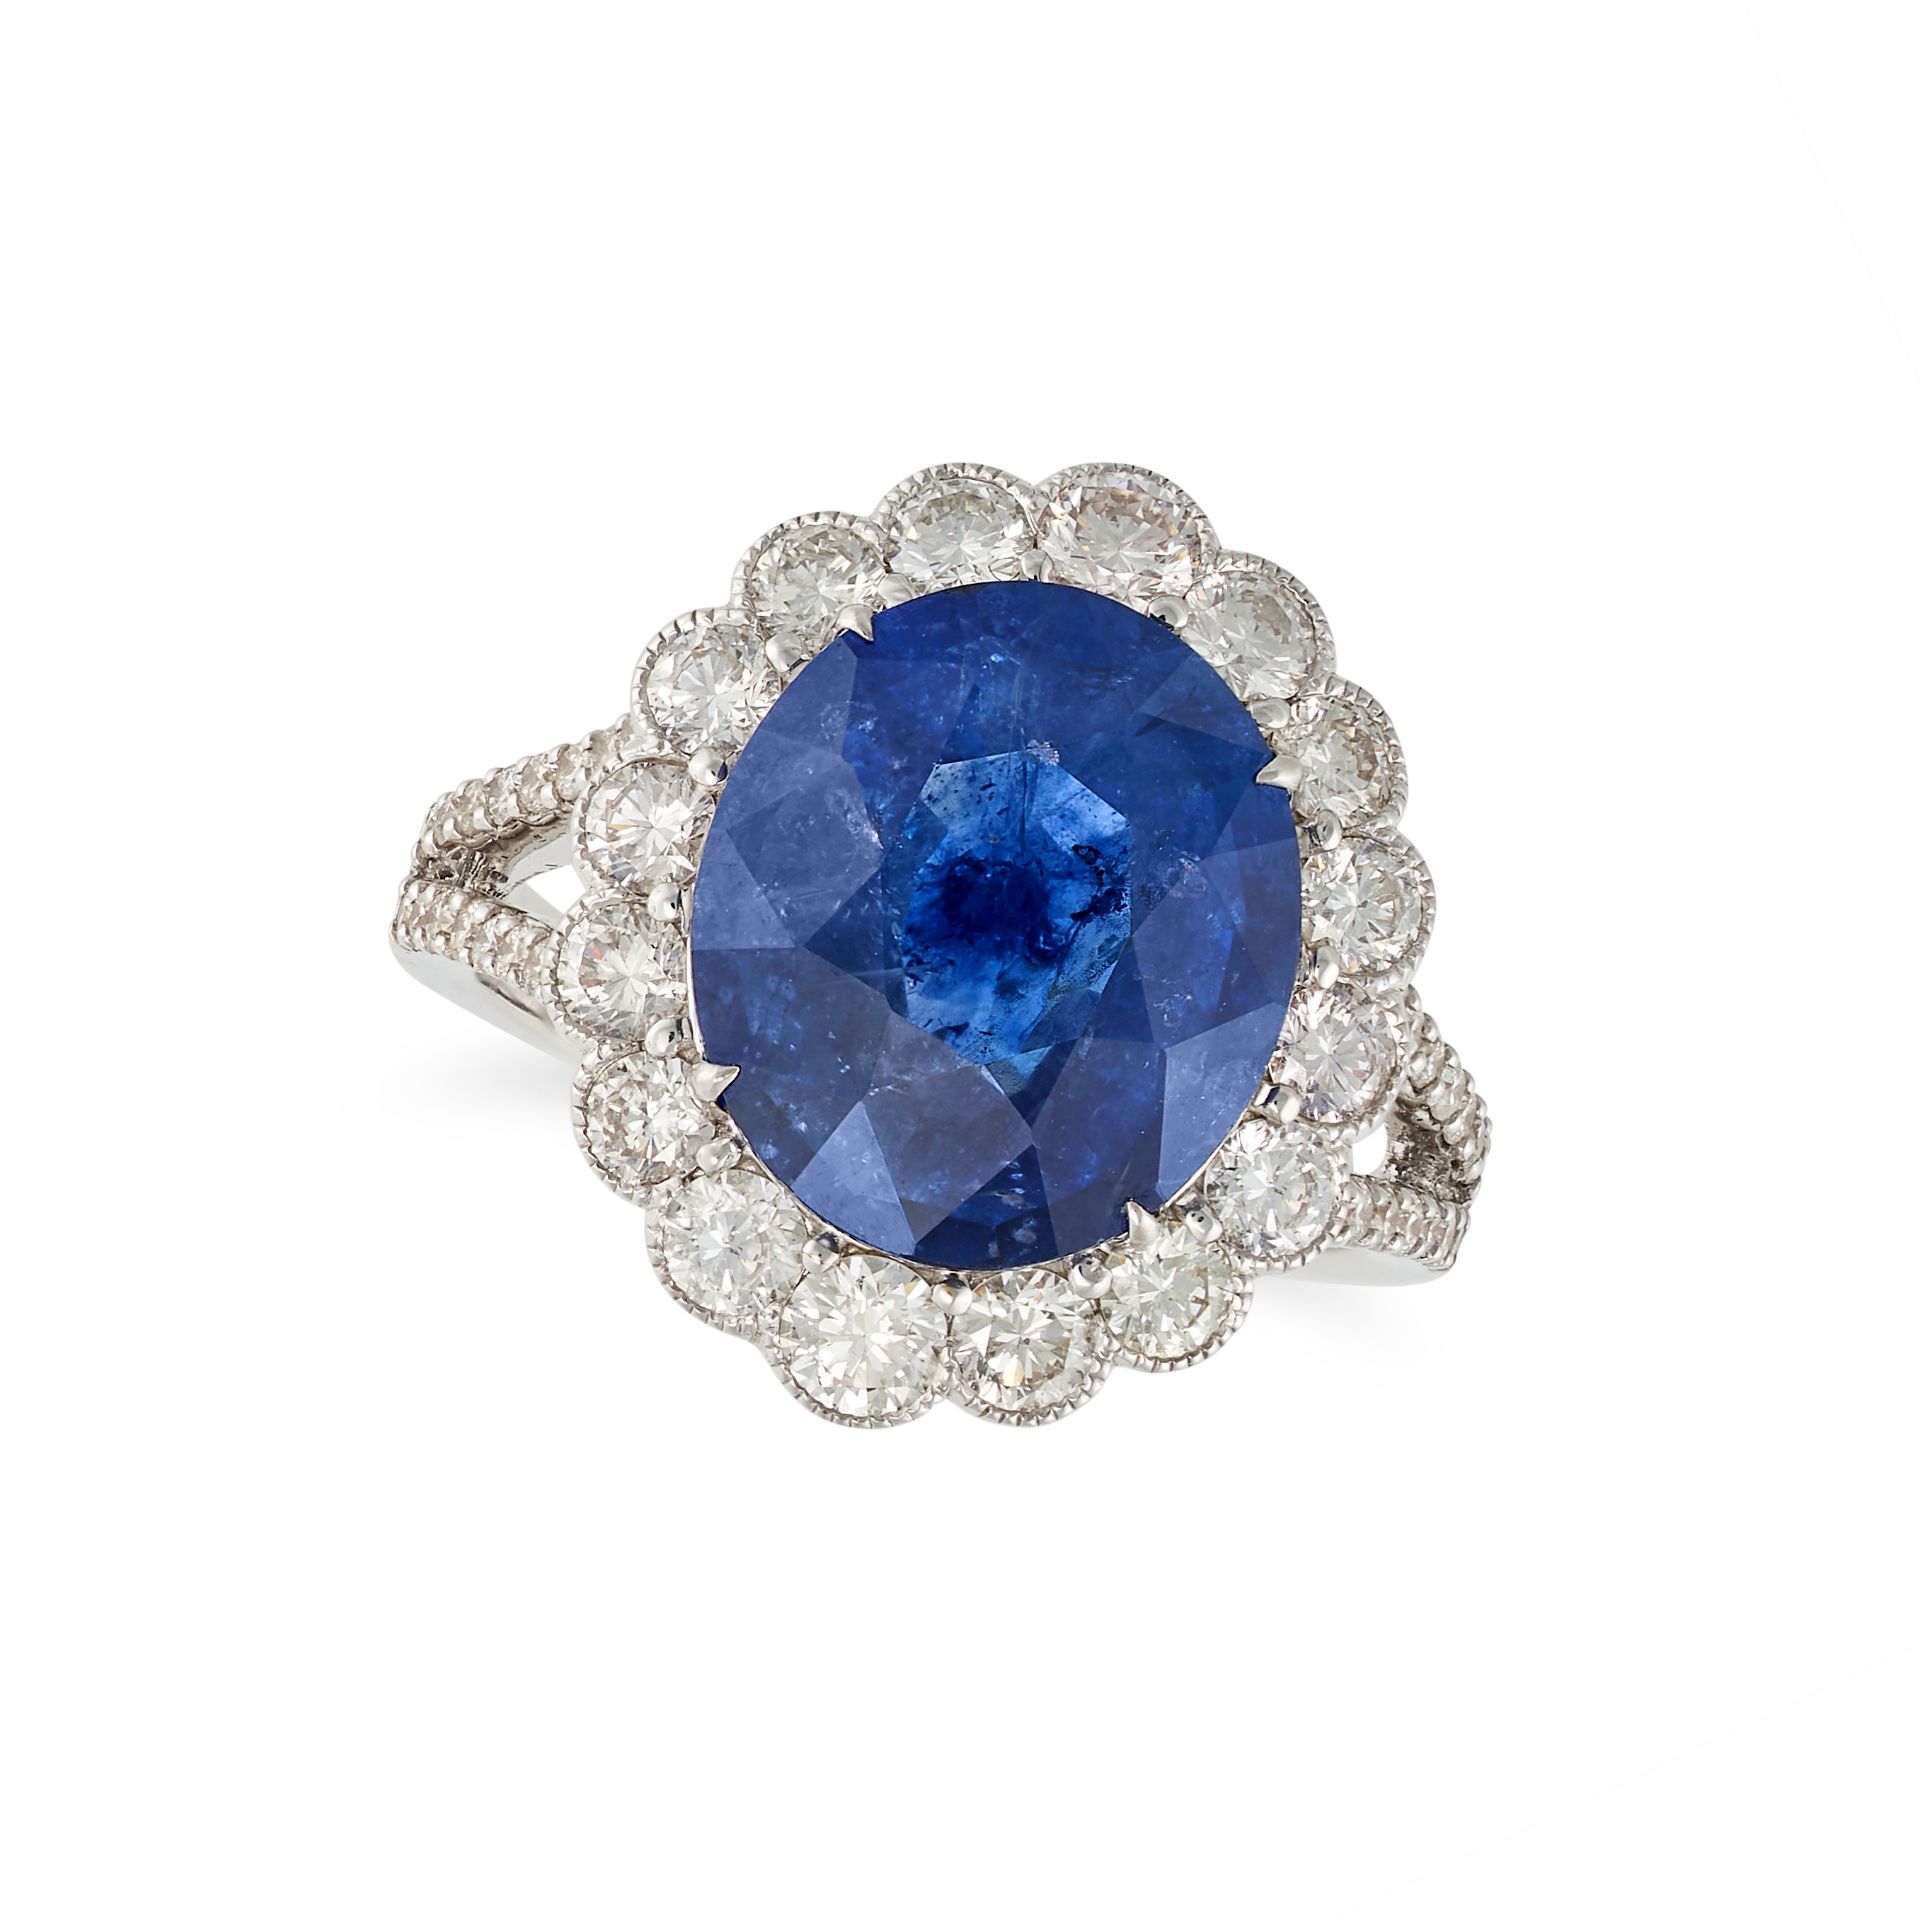 A SAPPHIRE AND DIAMOND CLUSTER RING in 18ct white gold, set with an oval cut sapphire of 7.02 car...